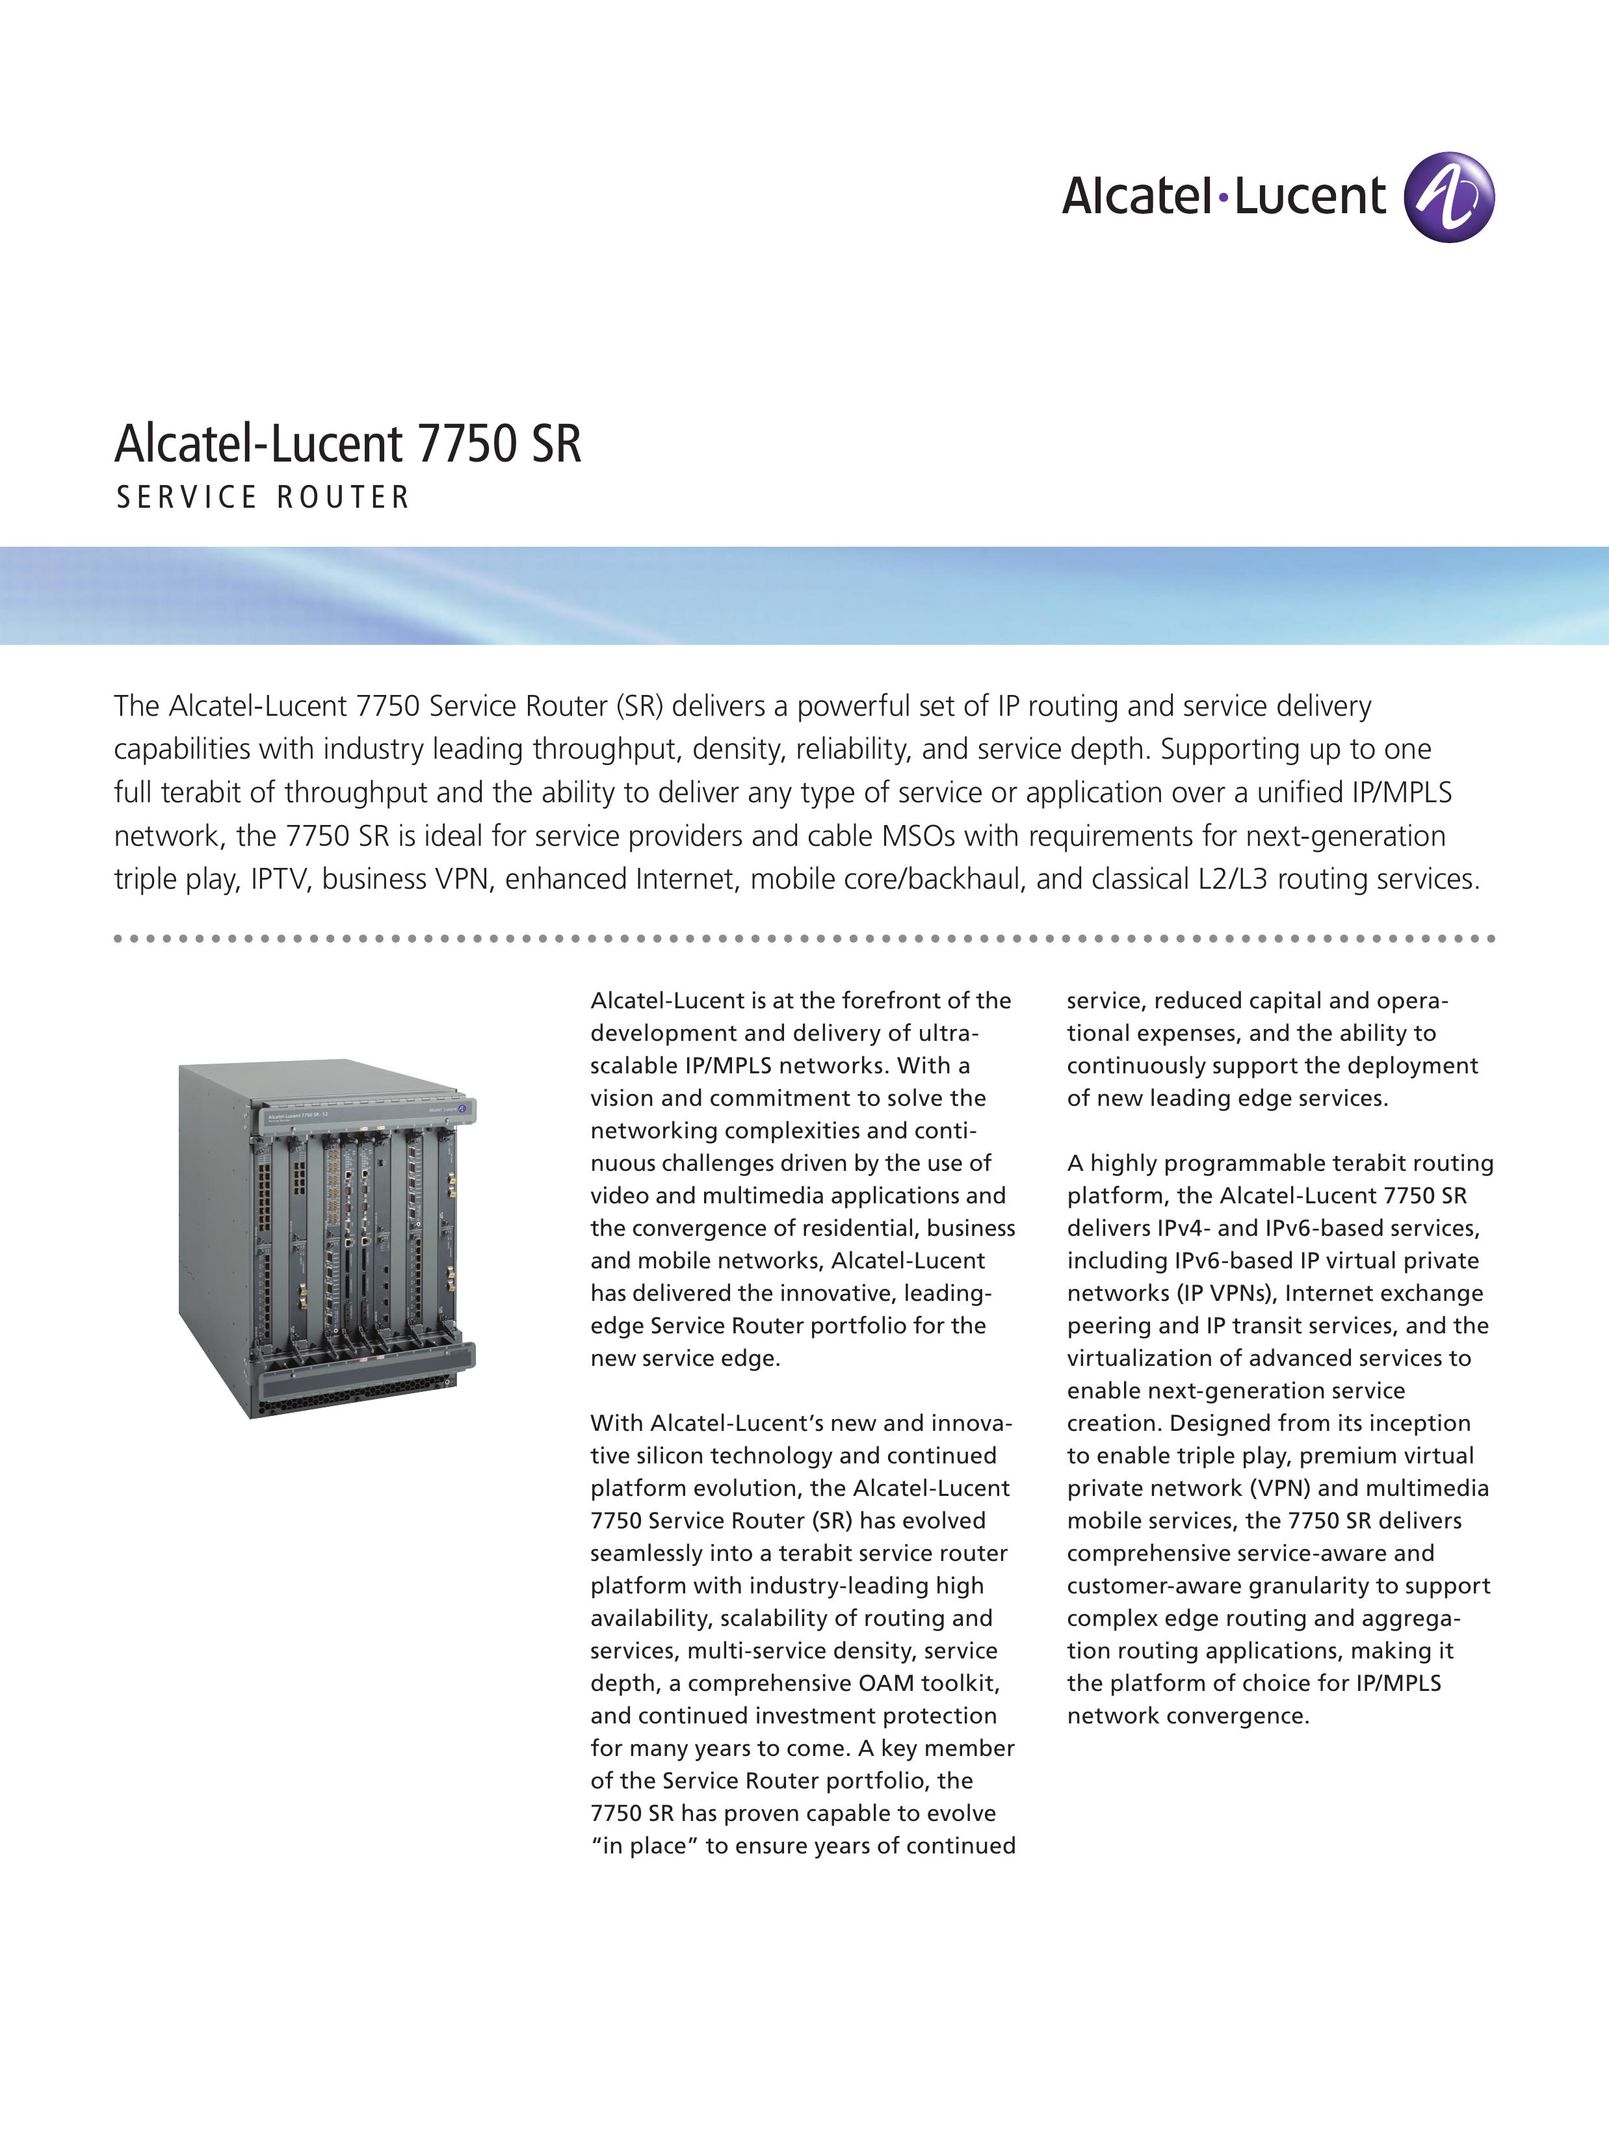 Alcatel-Lucent 7750 SR Network Router User Manual